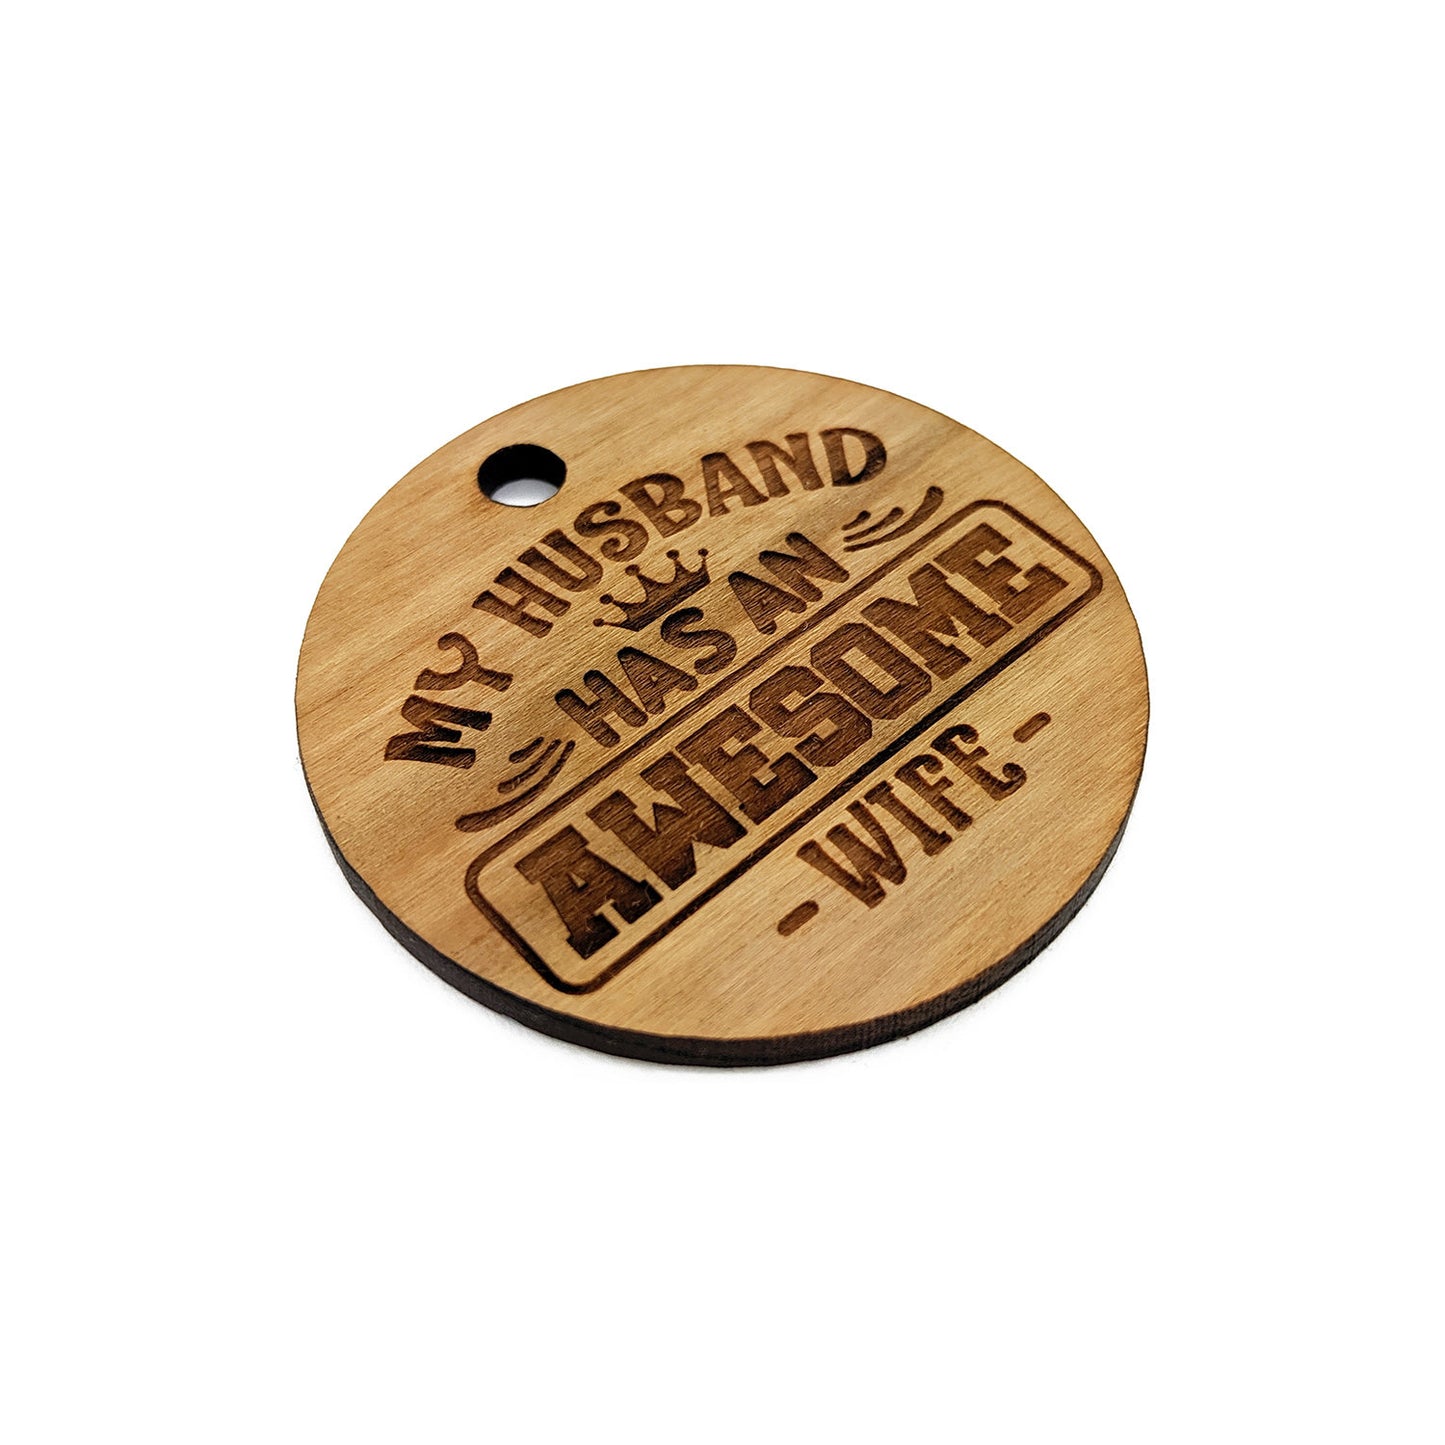 Awesome Wife Large Round Engraved Wood Charm Blanks